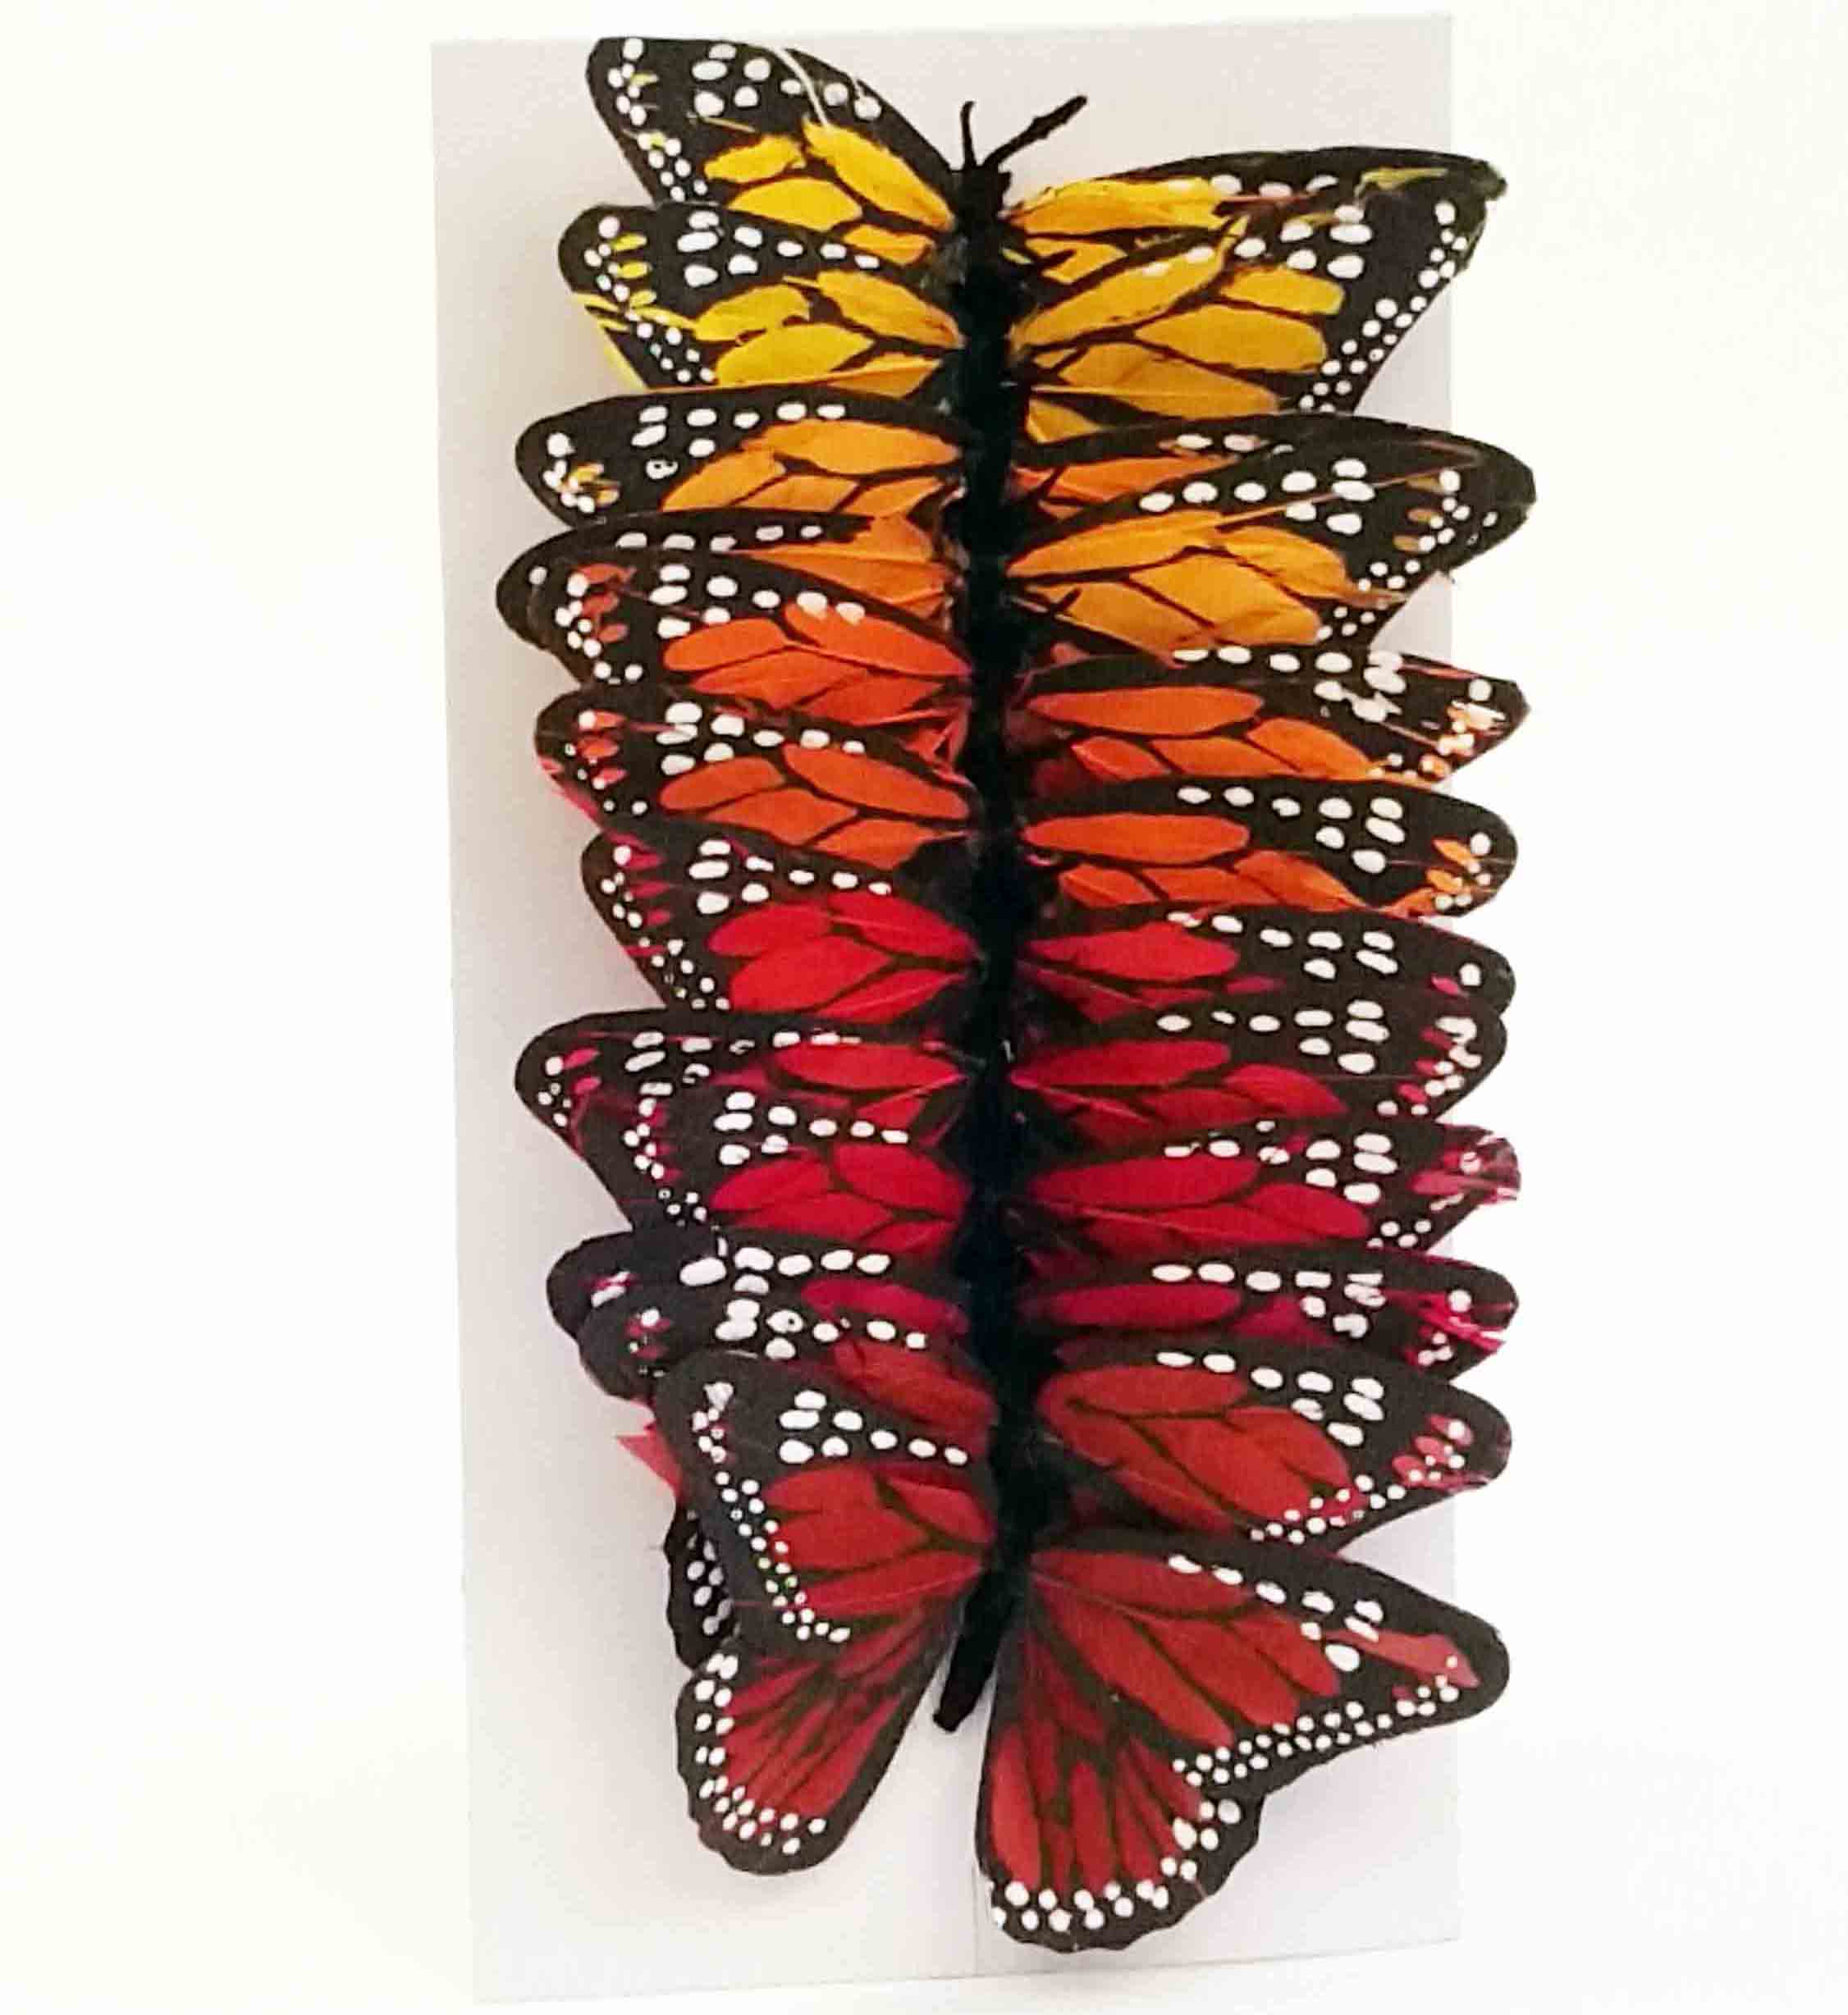 945 - 4.5" Monarch Butterfly - 19.95 box of 12